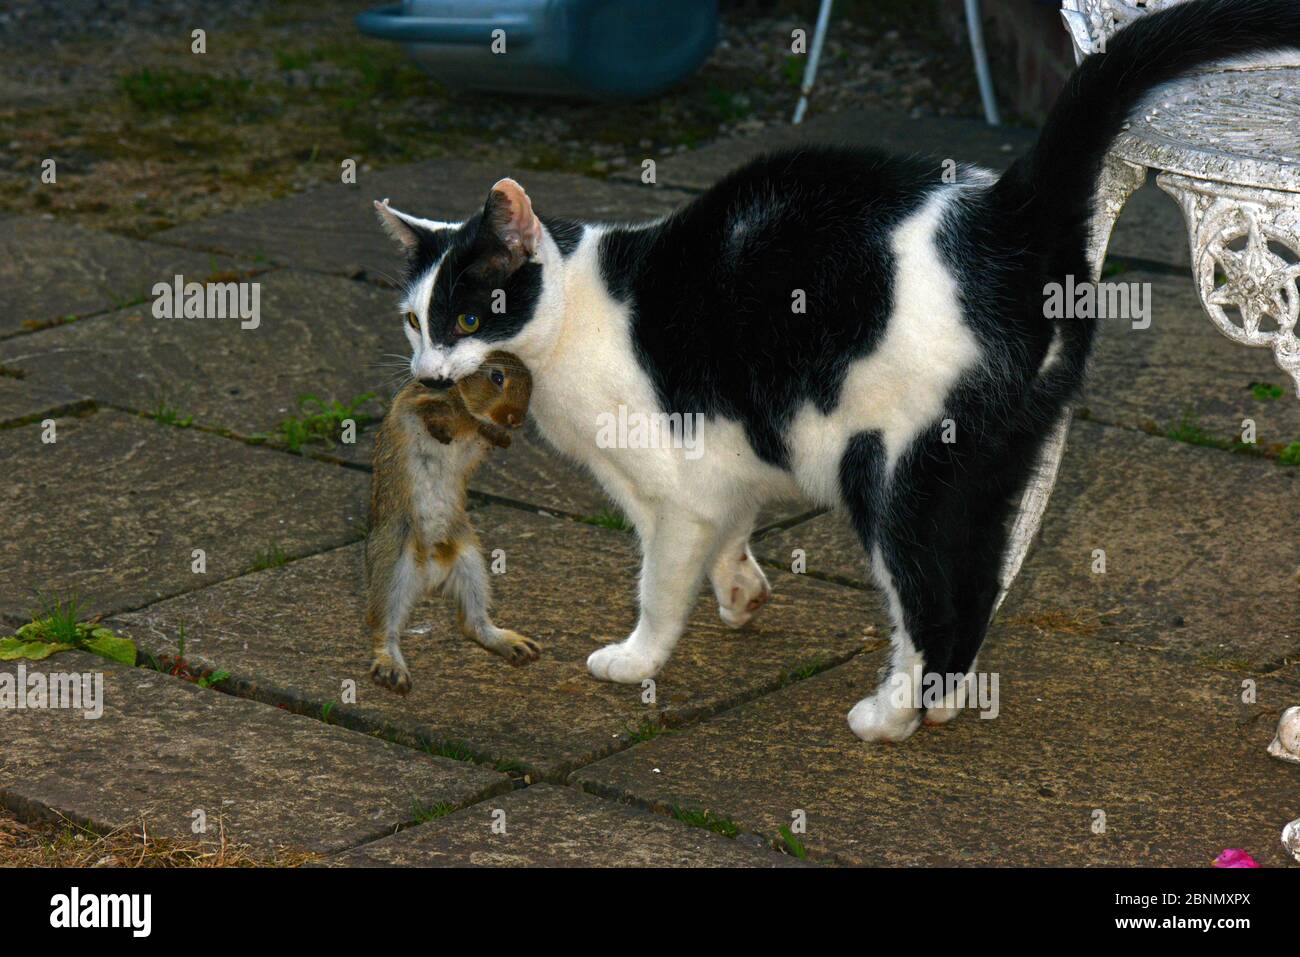 Domestic black and white cat (Felis silvestris catus) with young European Rabbit (Oryctolagus cuniculus) in its mouth, on garden patio, Herefordshire, Stock Photo